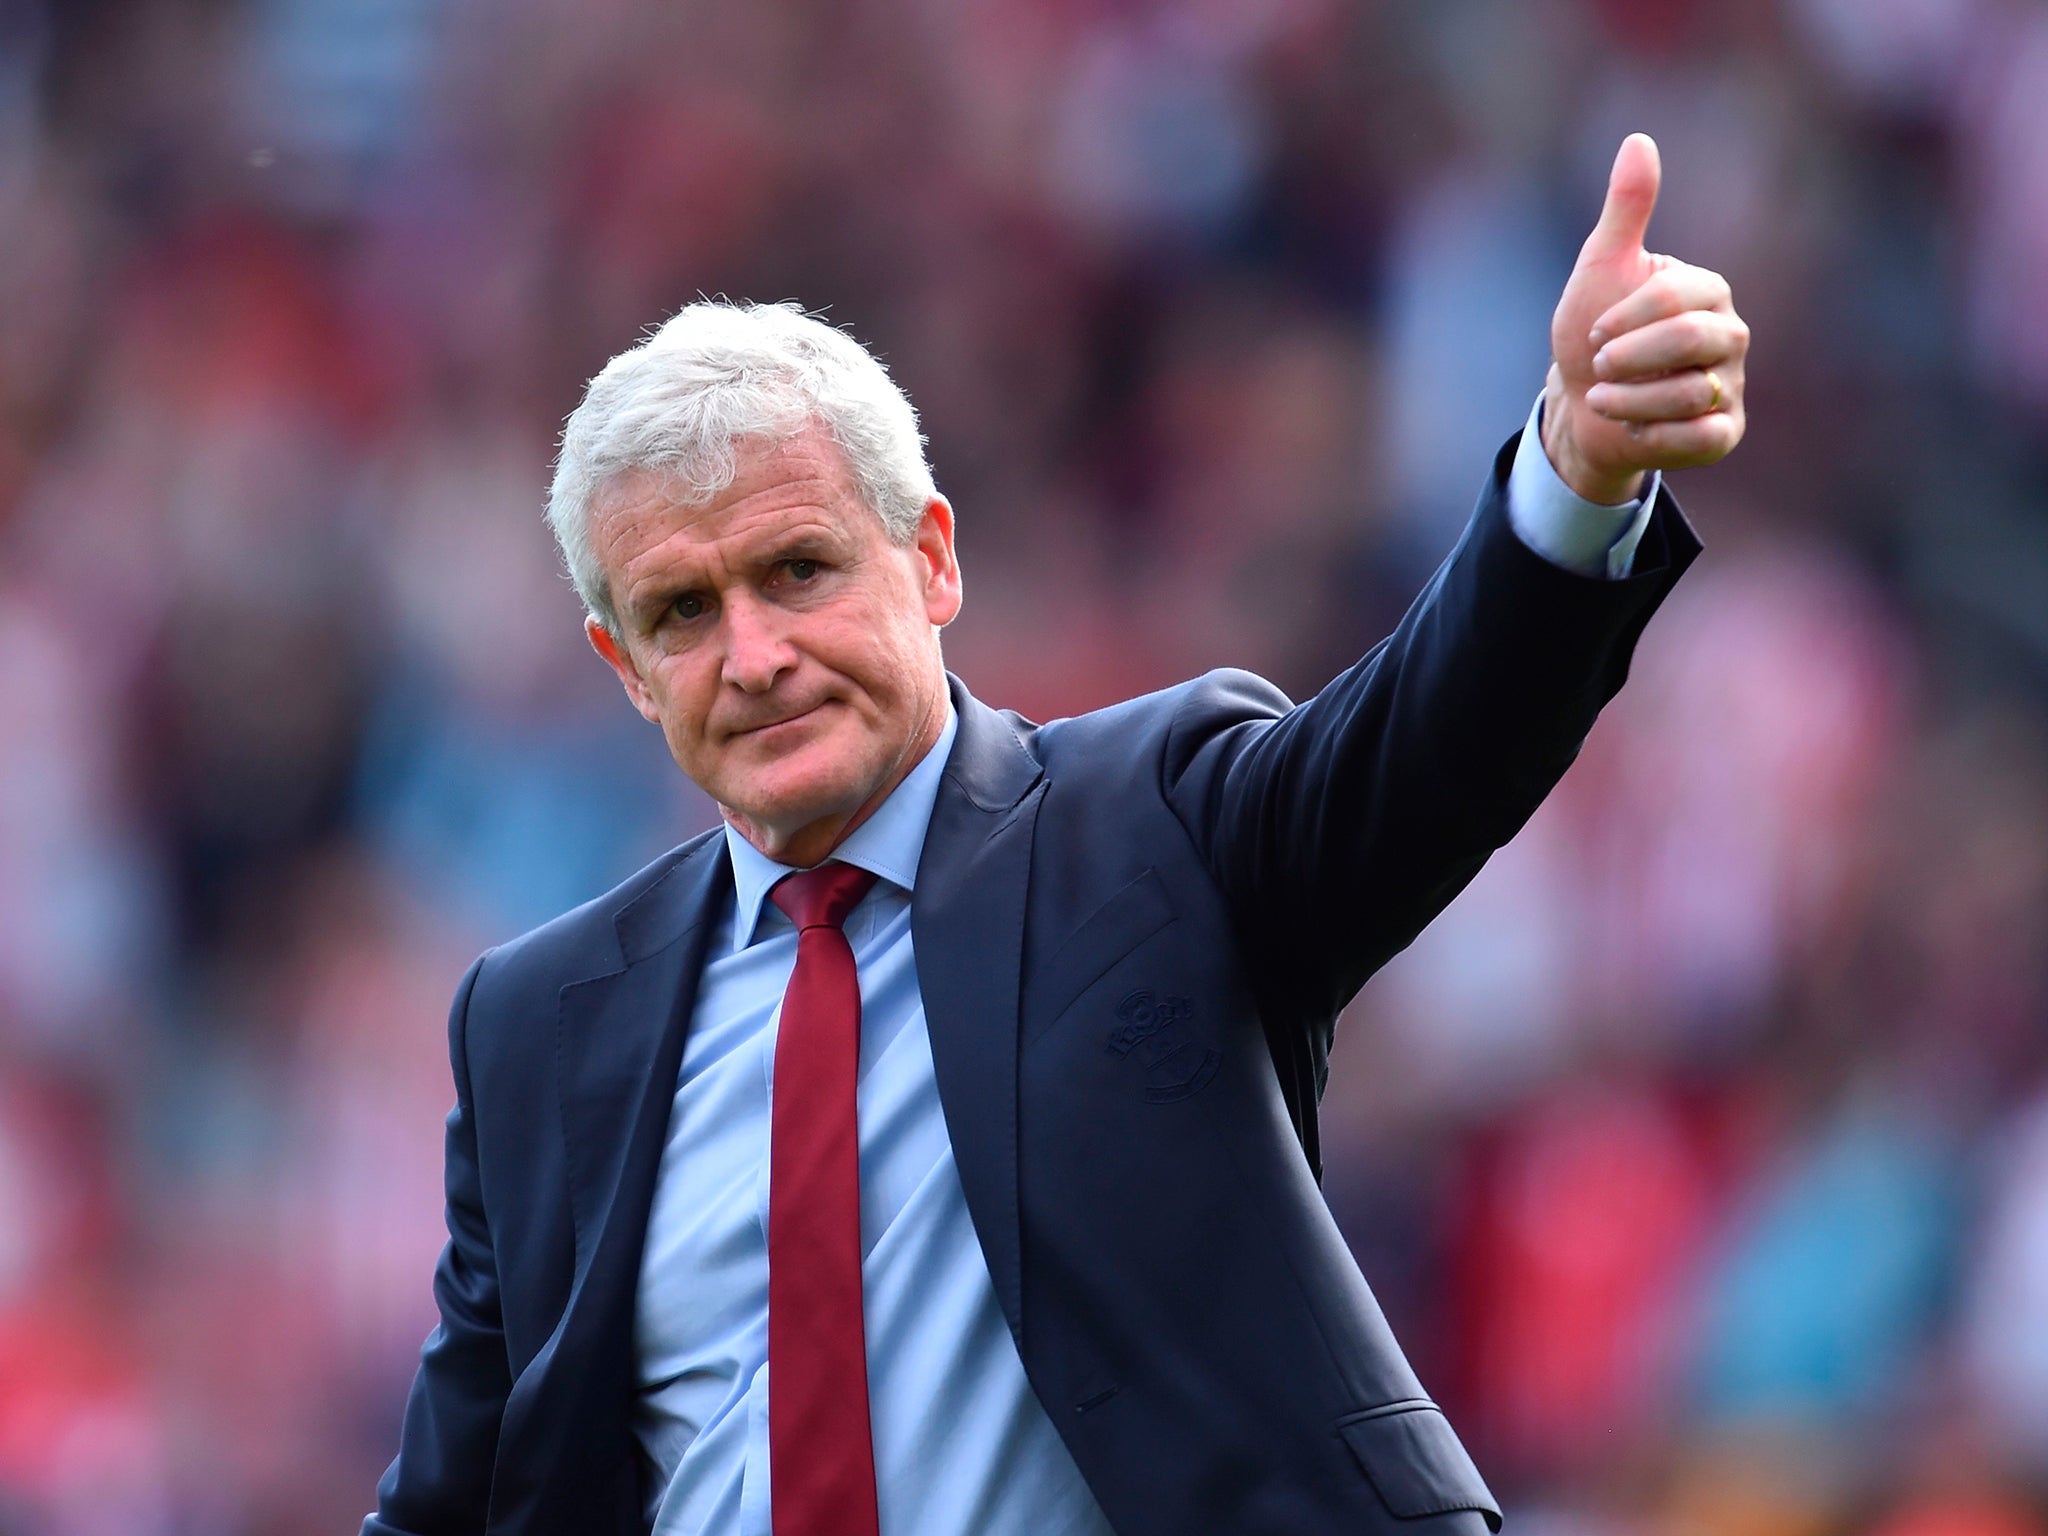 Southampton are in talks to extend Mark Hughes’ contract